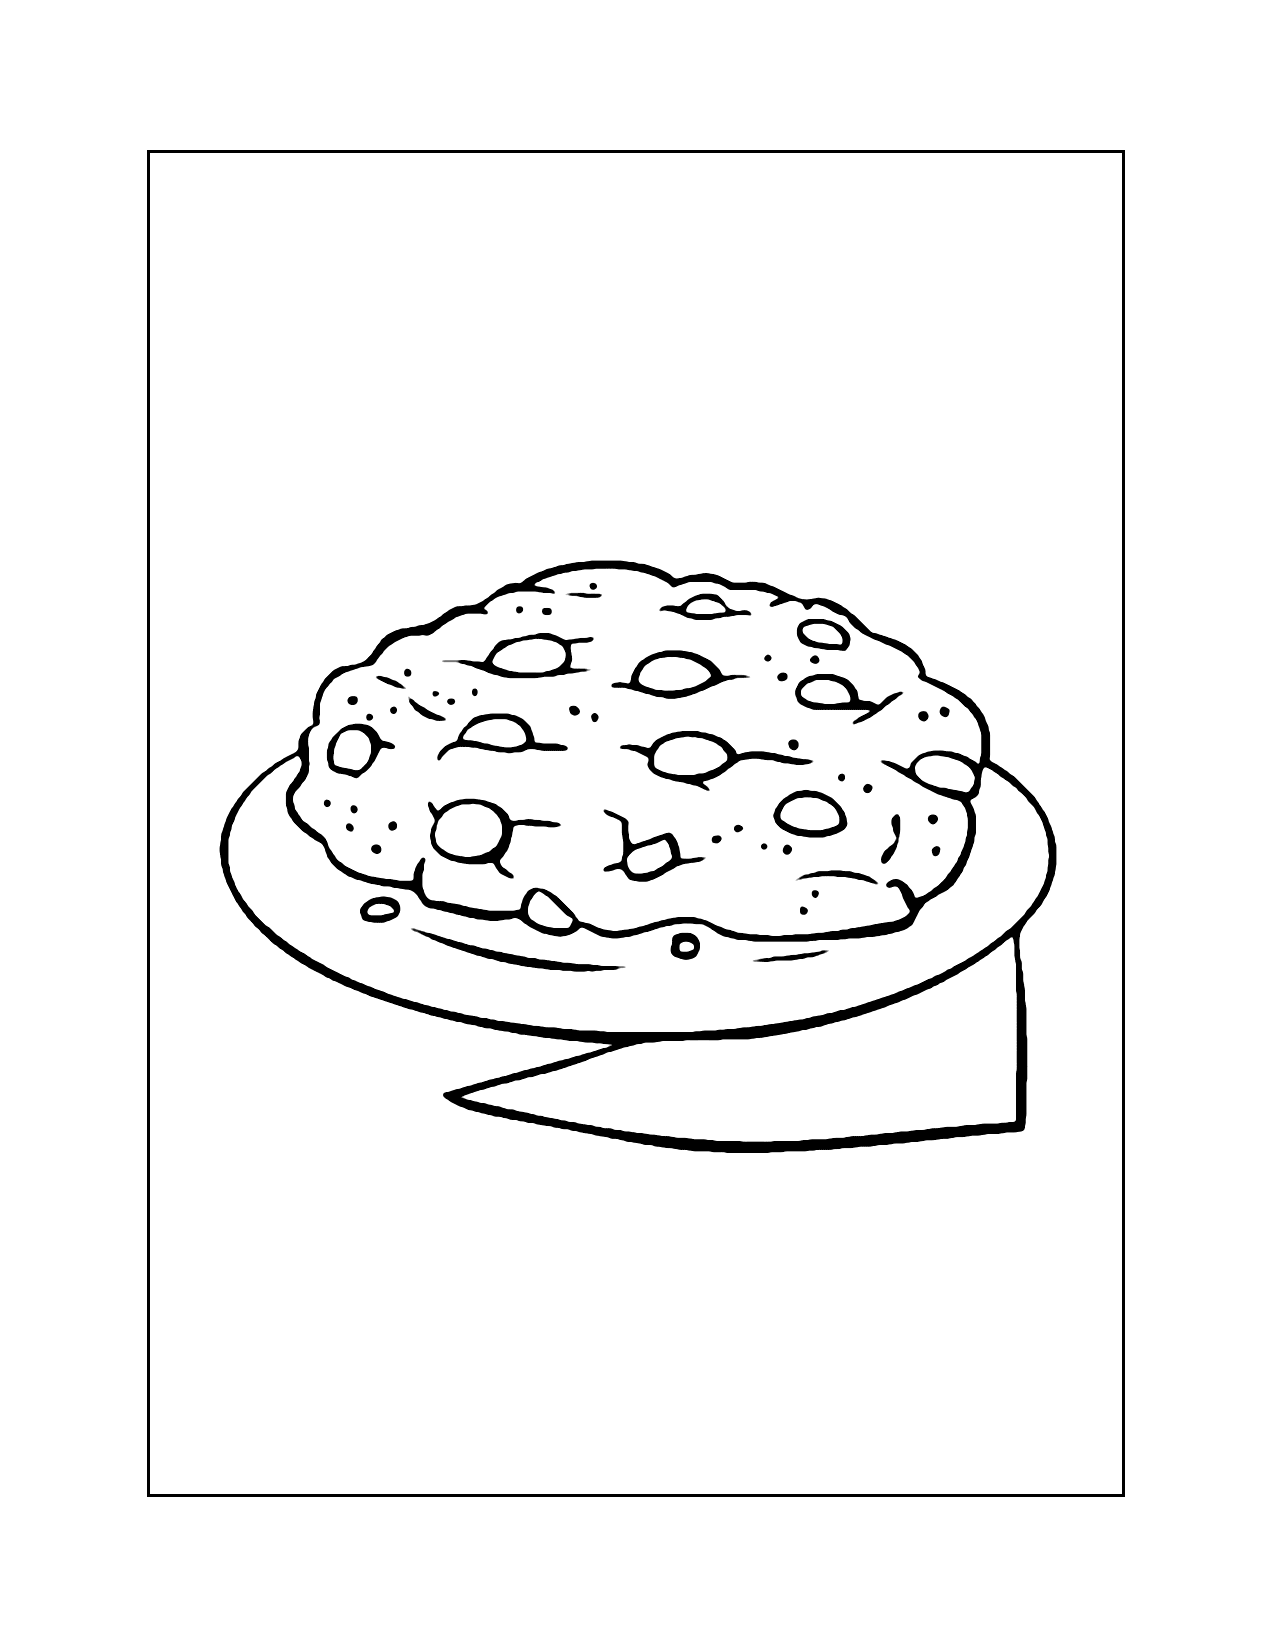 Big Chocolate Chip Cookie Coloring Page